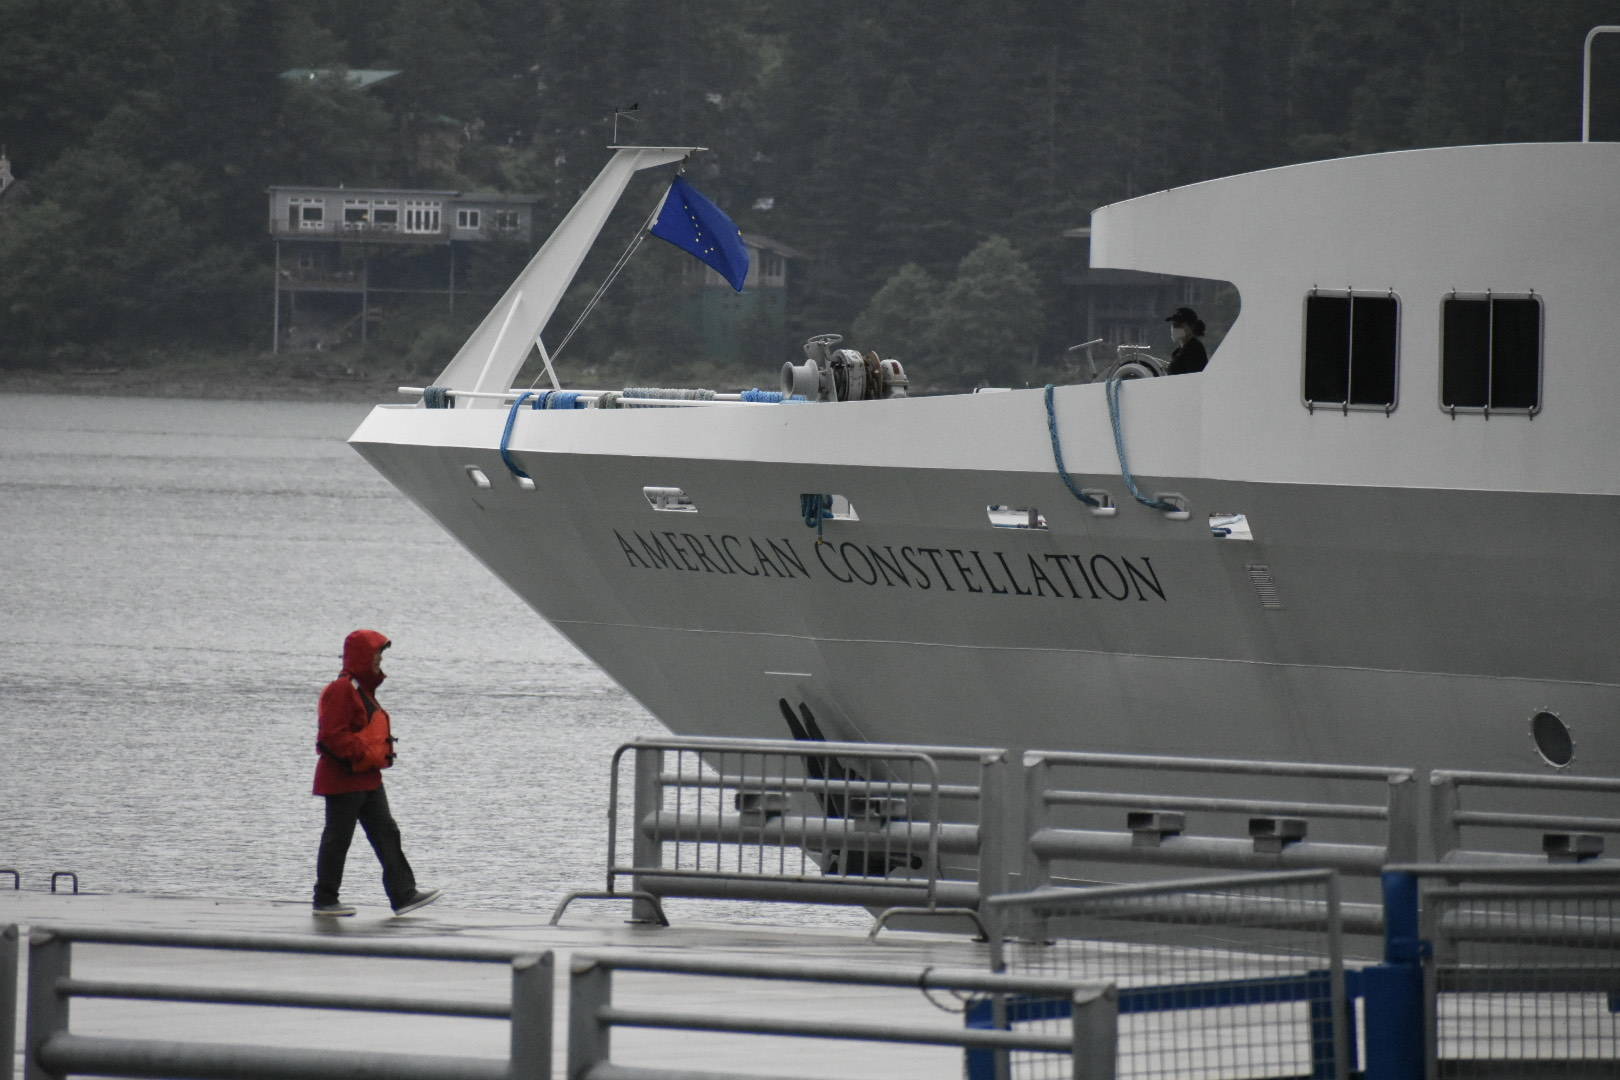 The American Constellation arrives at the cruise ship docks Monday evening. Crew members will quarantine on board he American Cruise Lines vessel following multiple reported cases of COVID-19 among the crew, according to City and Borough of Juneau. (Peter Segall / Juneau Empire)